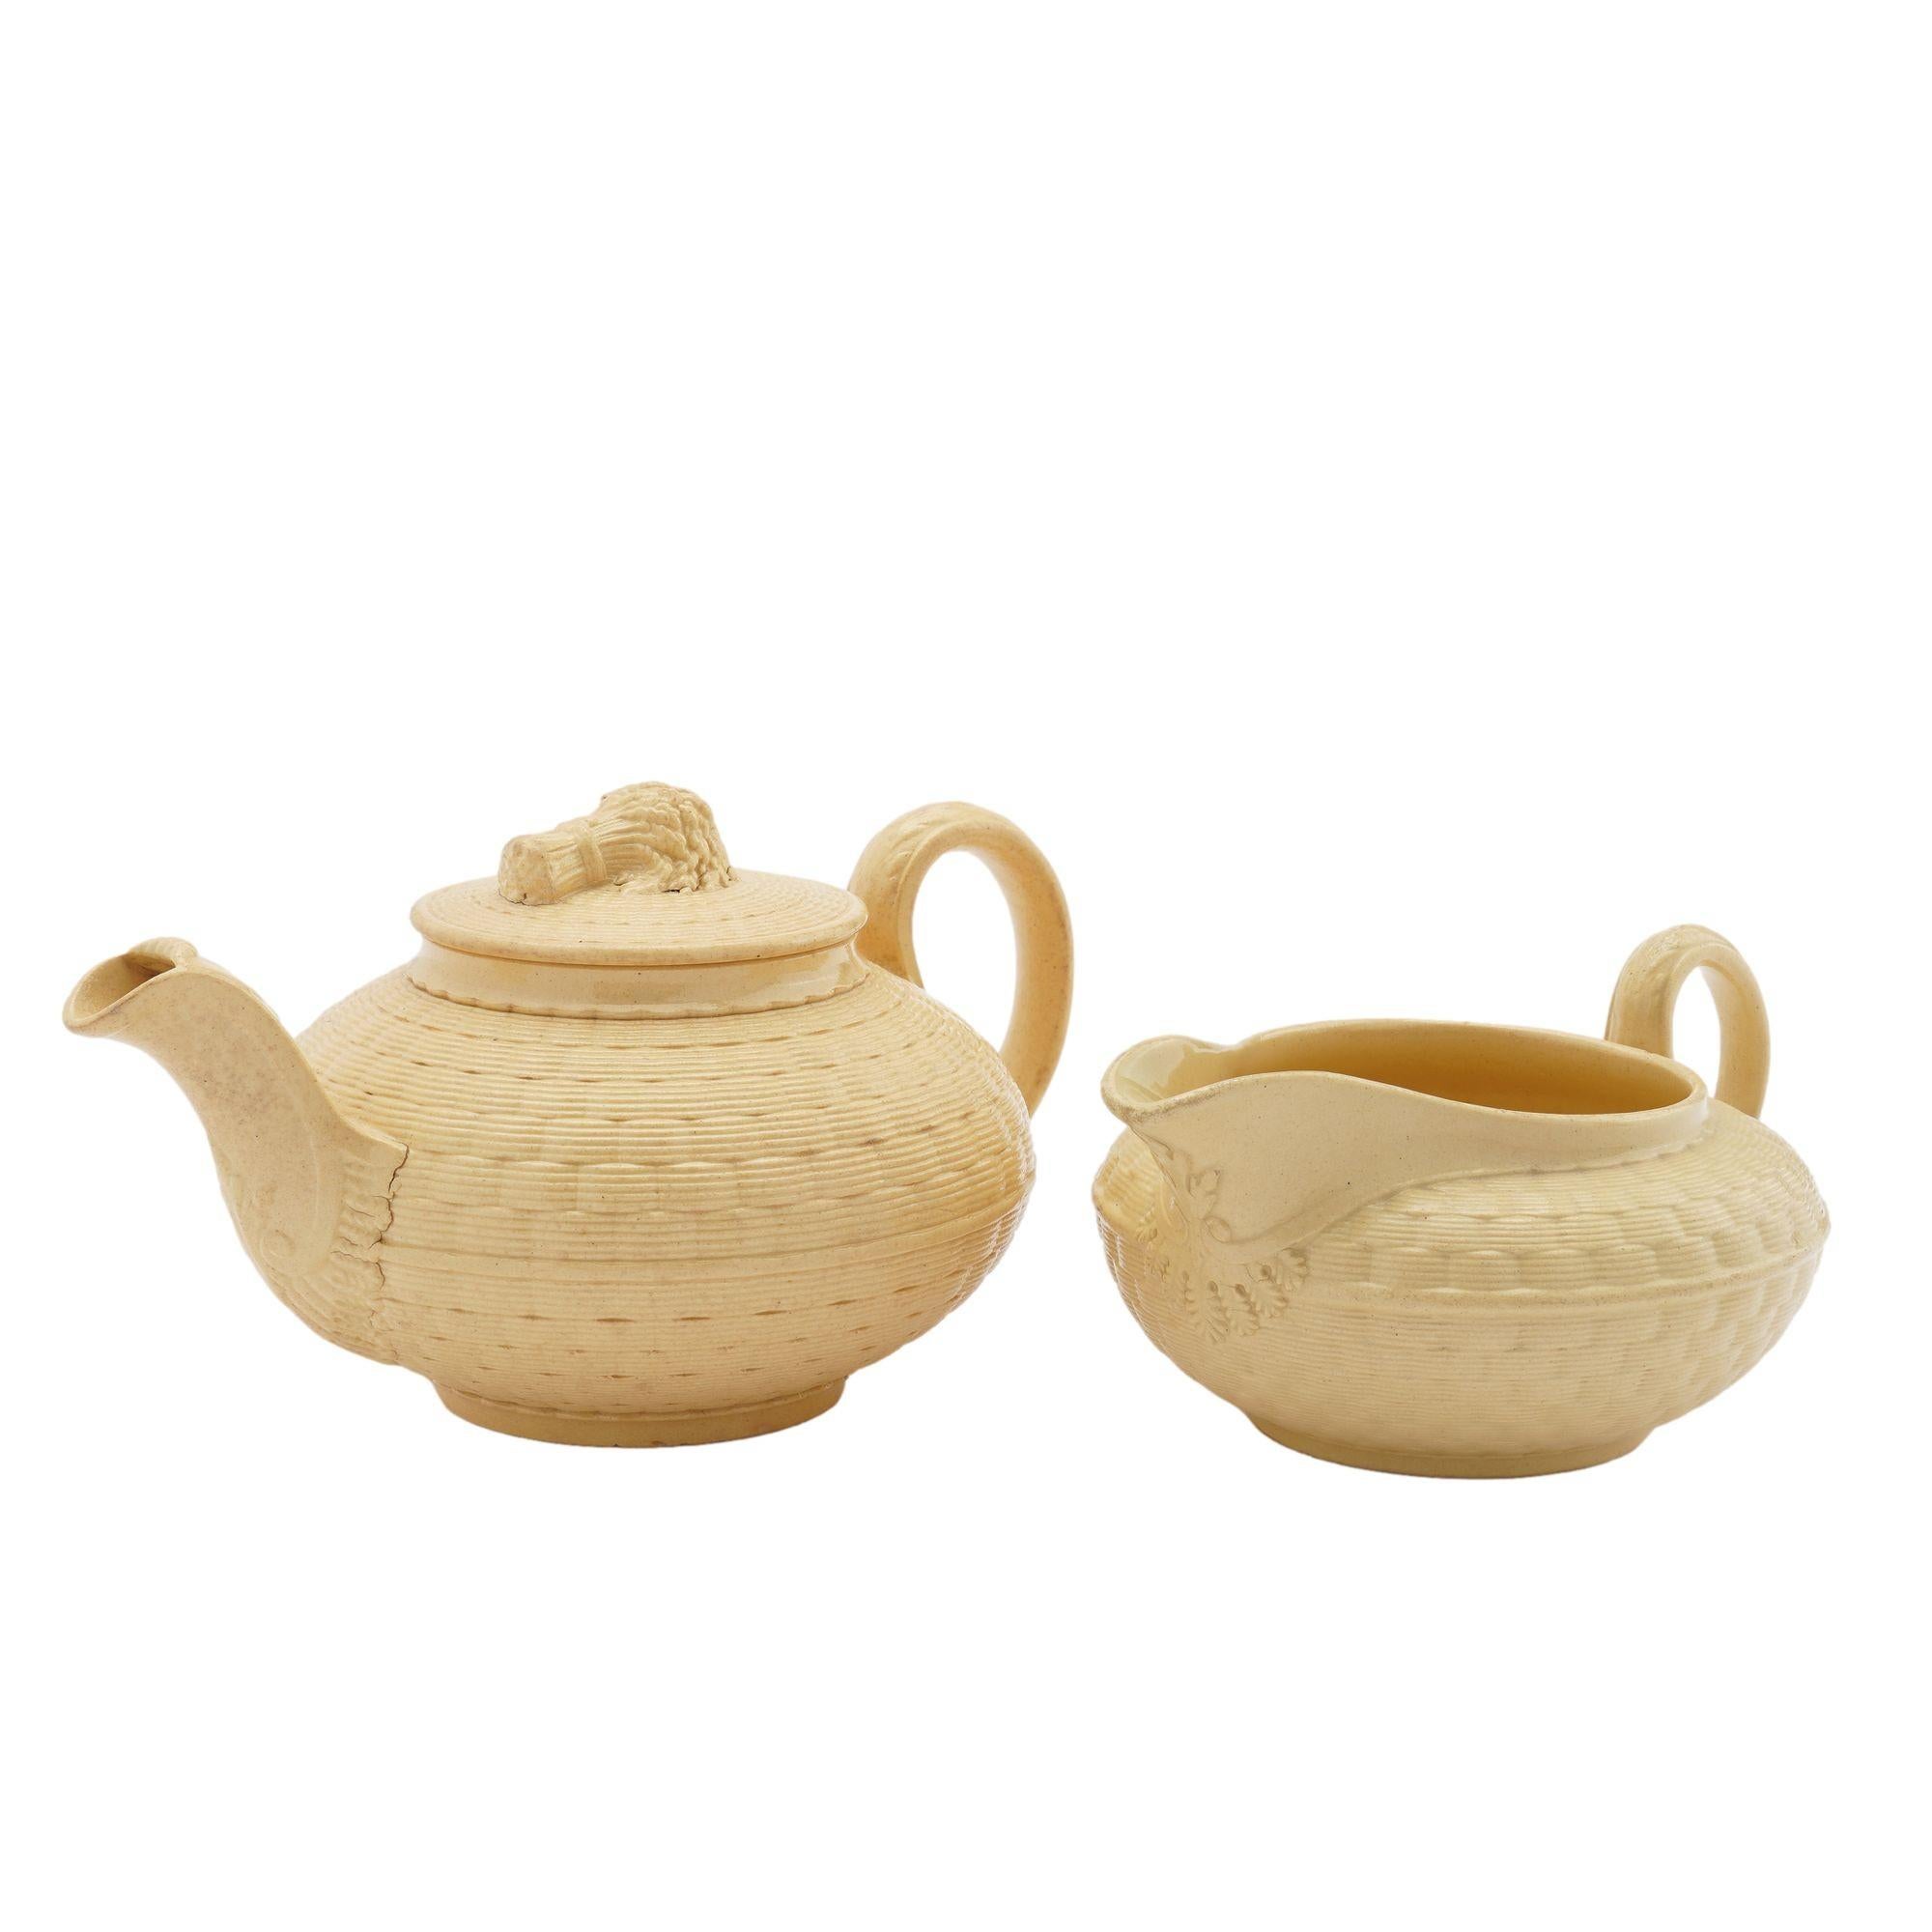 British Caneware creamer and teapot by Wedgwood, c. 1817 For Sale